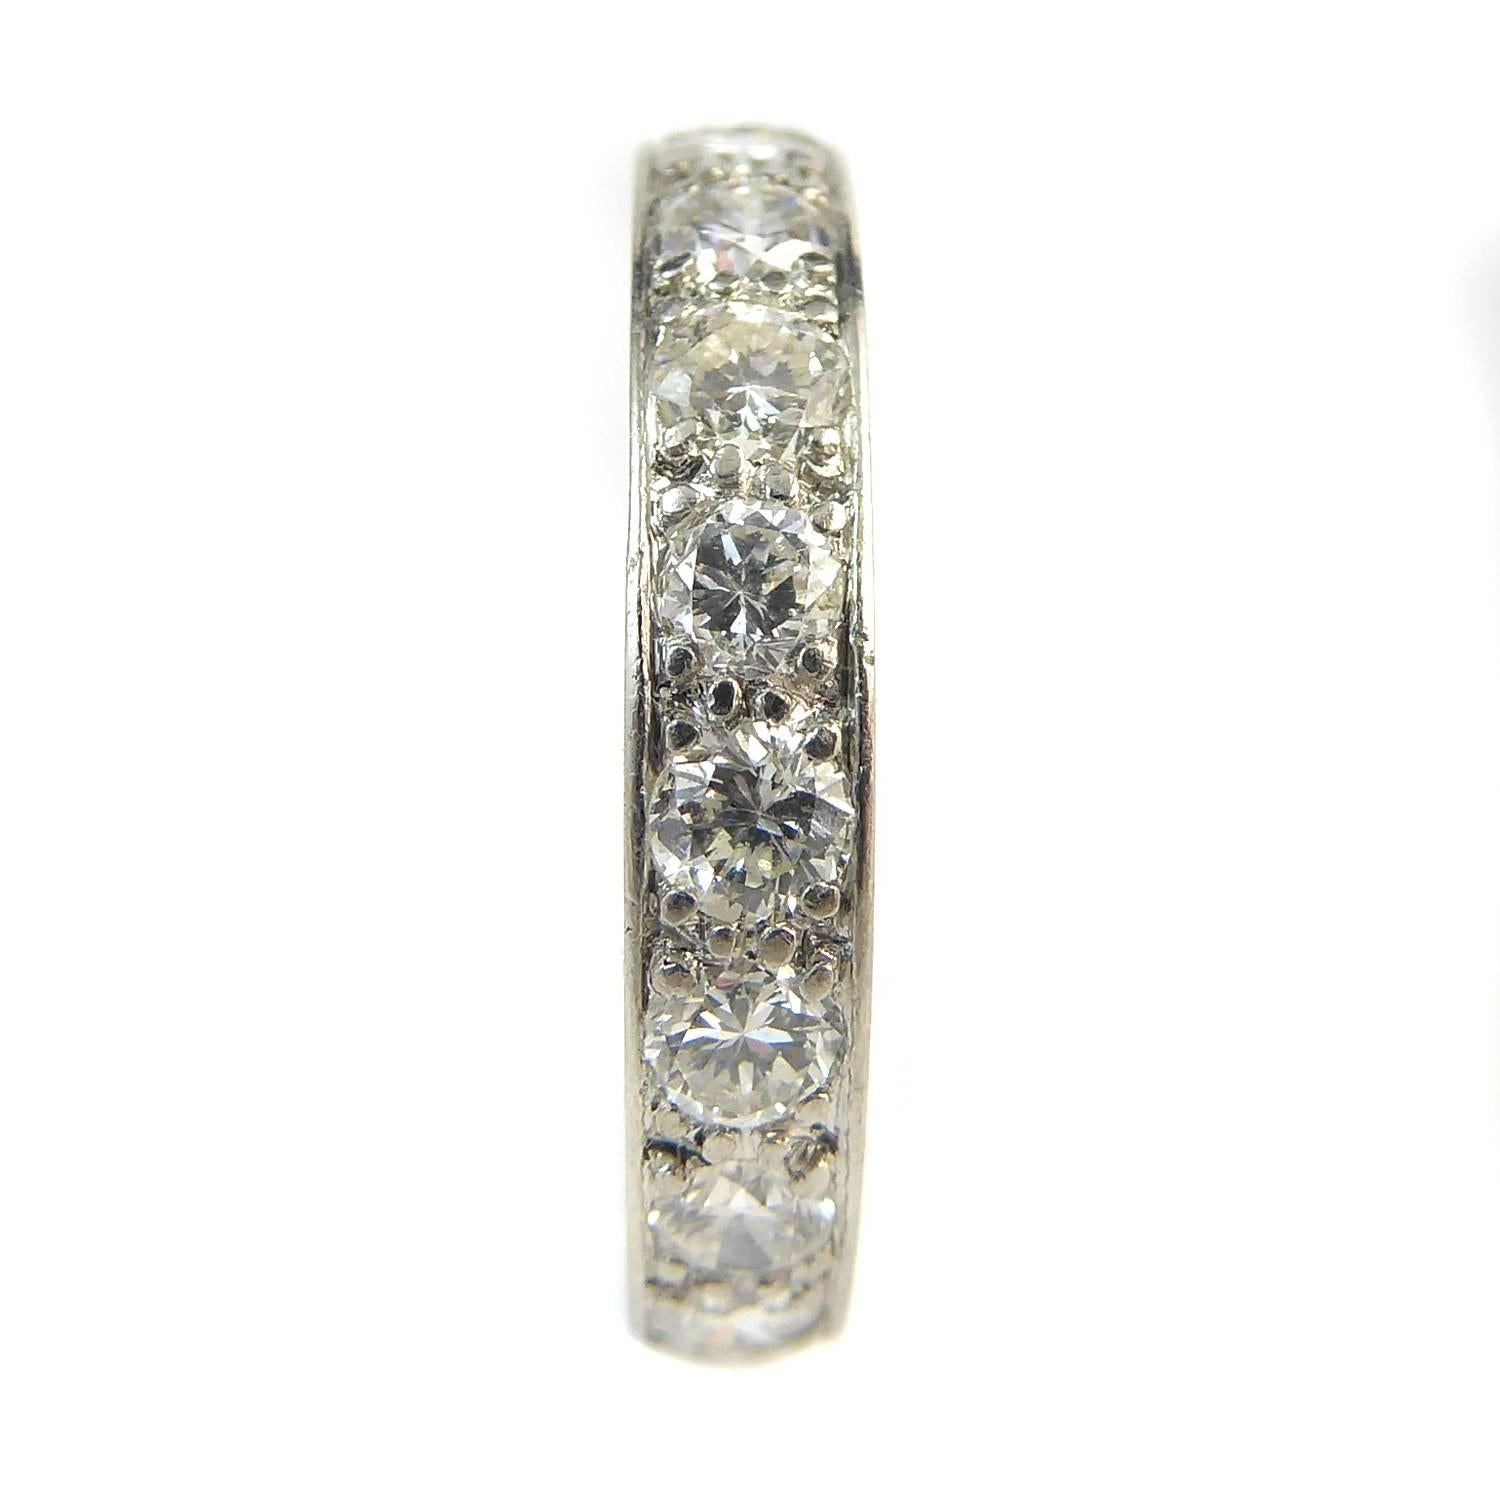     19 x brilliant cut diamonds
    2.8mm diameter each
    1.54ct total
    Assessed G-I colour, VS/SI clarity
    3.5mm wide band
    Tests as platinum
    Finger size 61/4 (US/Canada); M1/2 (UK/Australia)

A diamond set full eternity ring in